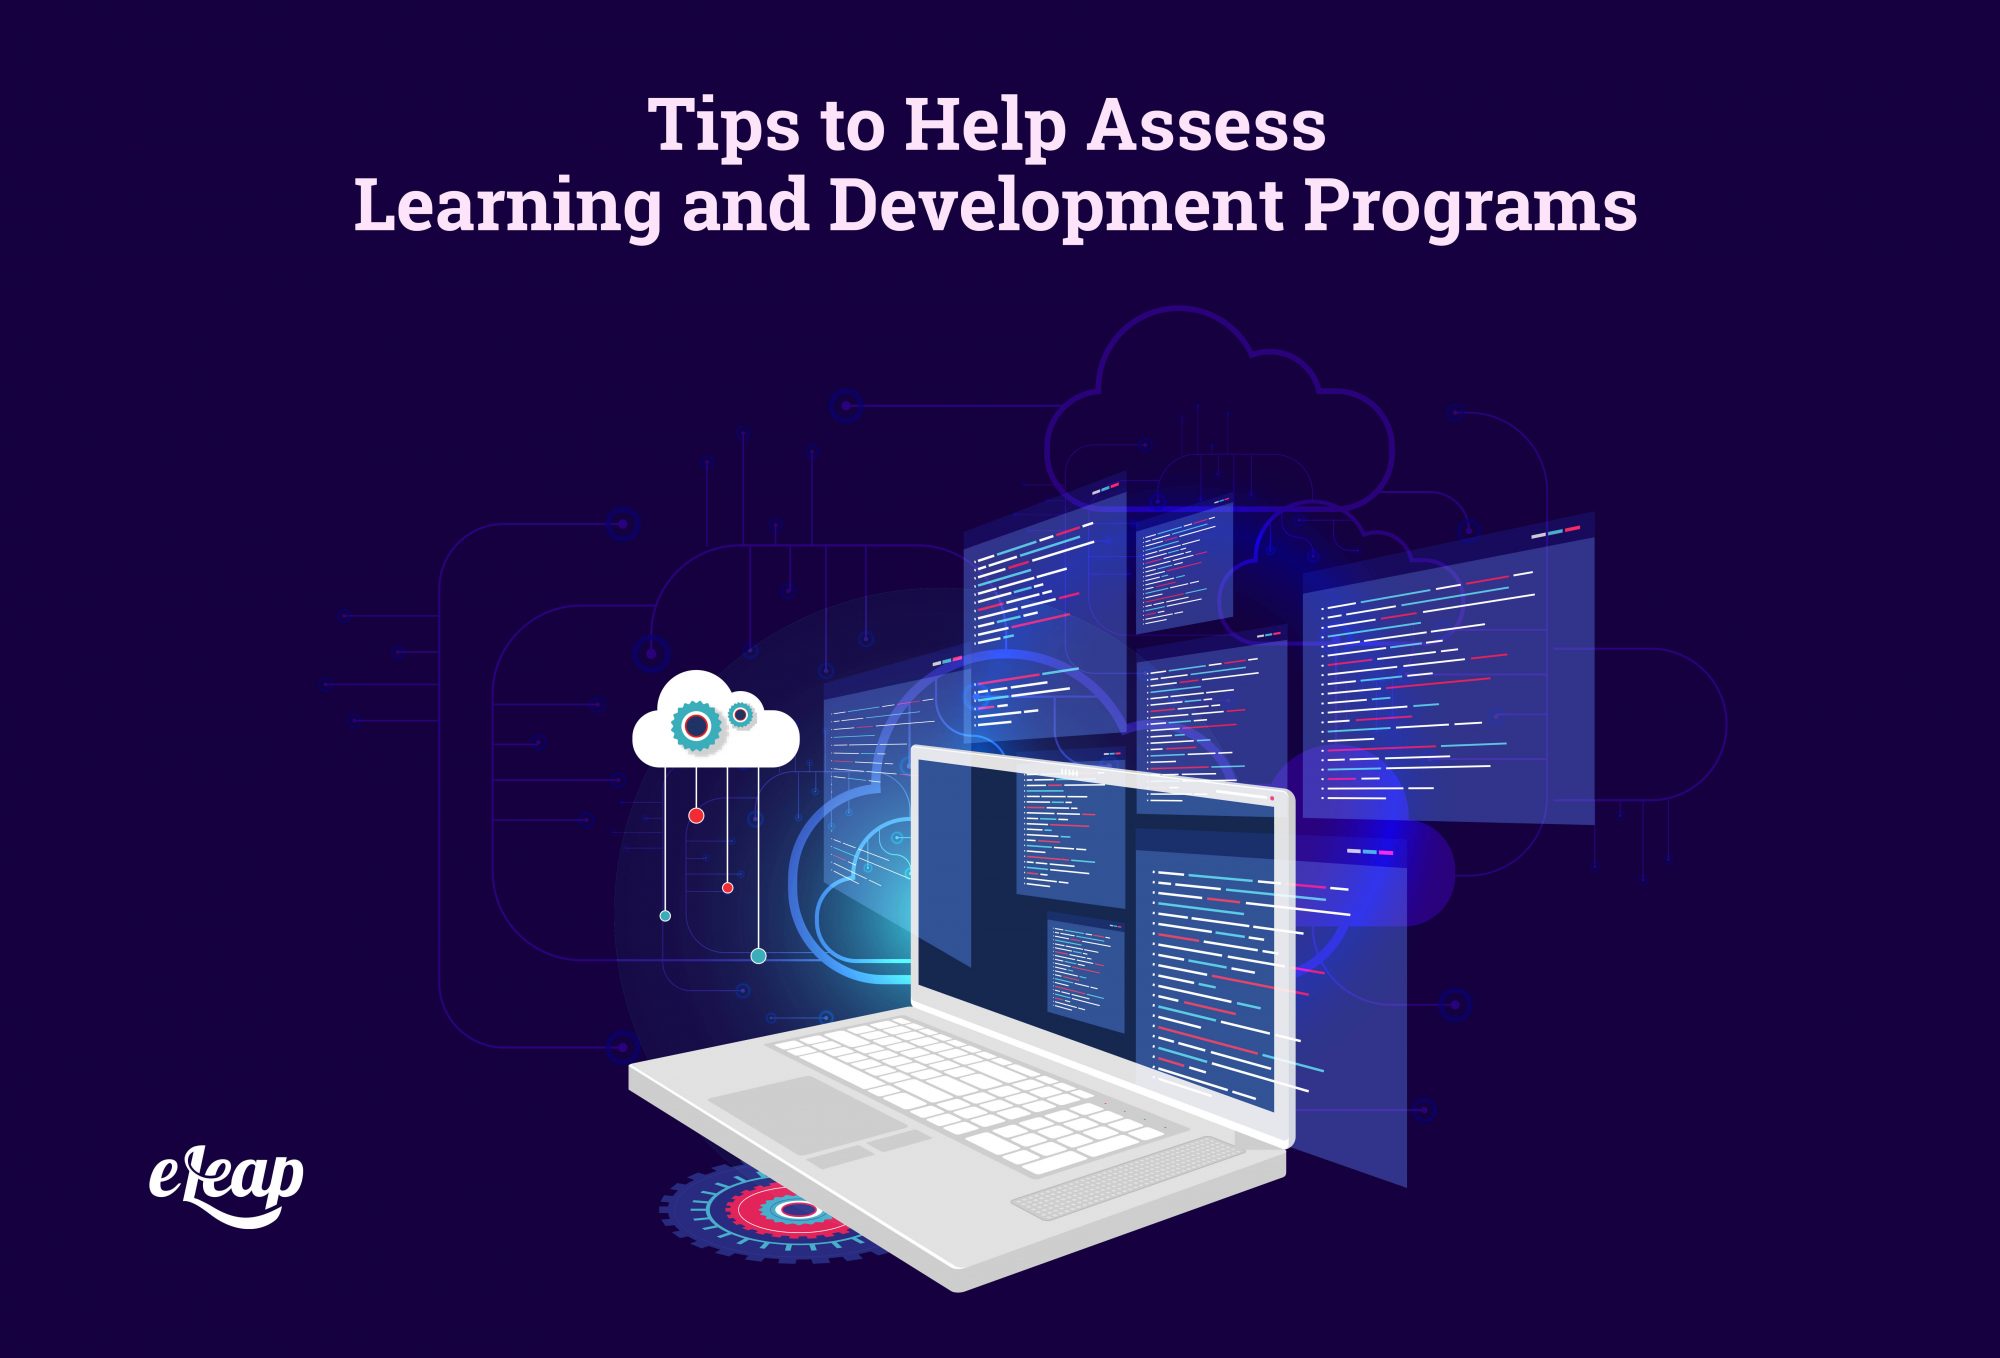 Tips to Help Assess Learning and Development Programs